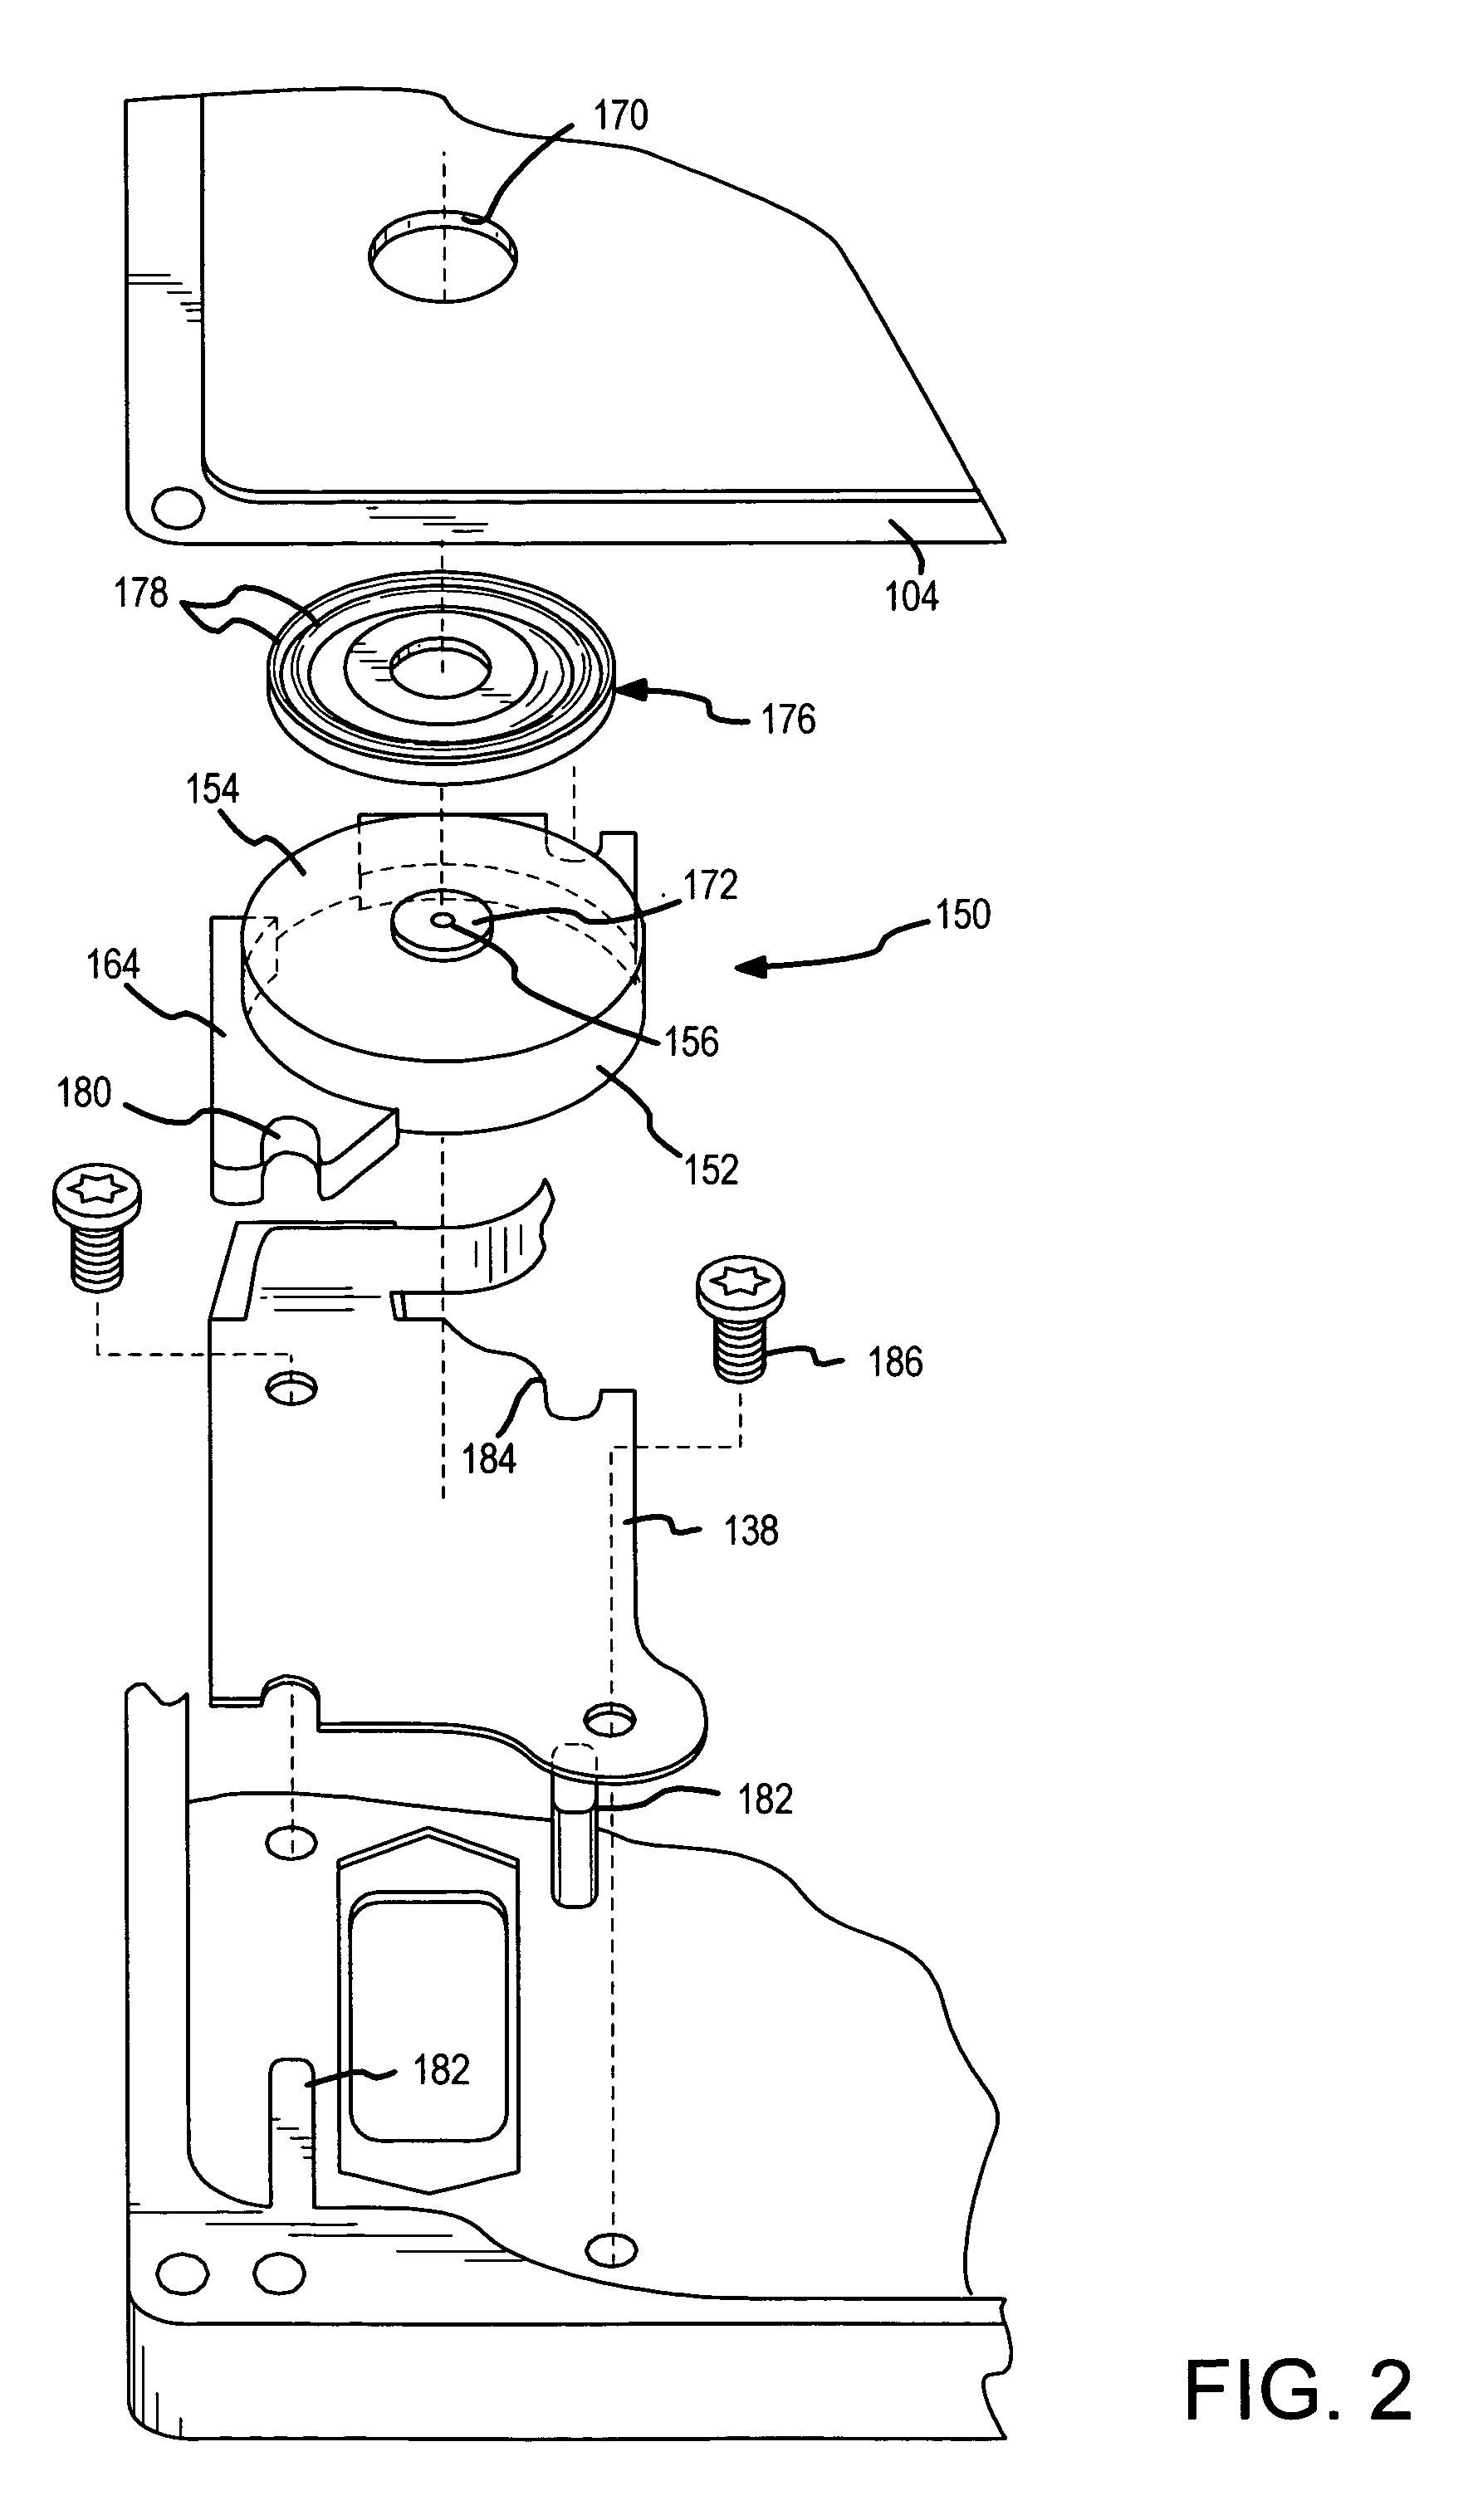 Disc drive breather filter mounted to a flex circuit bracket